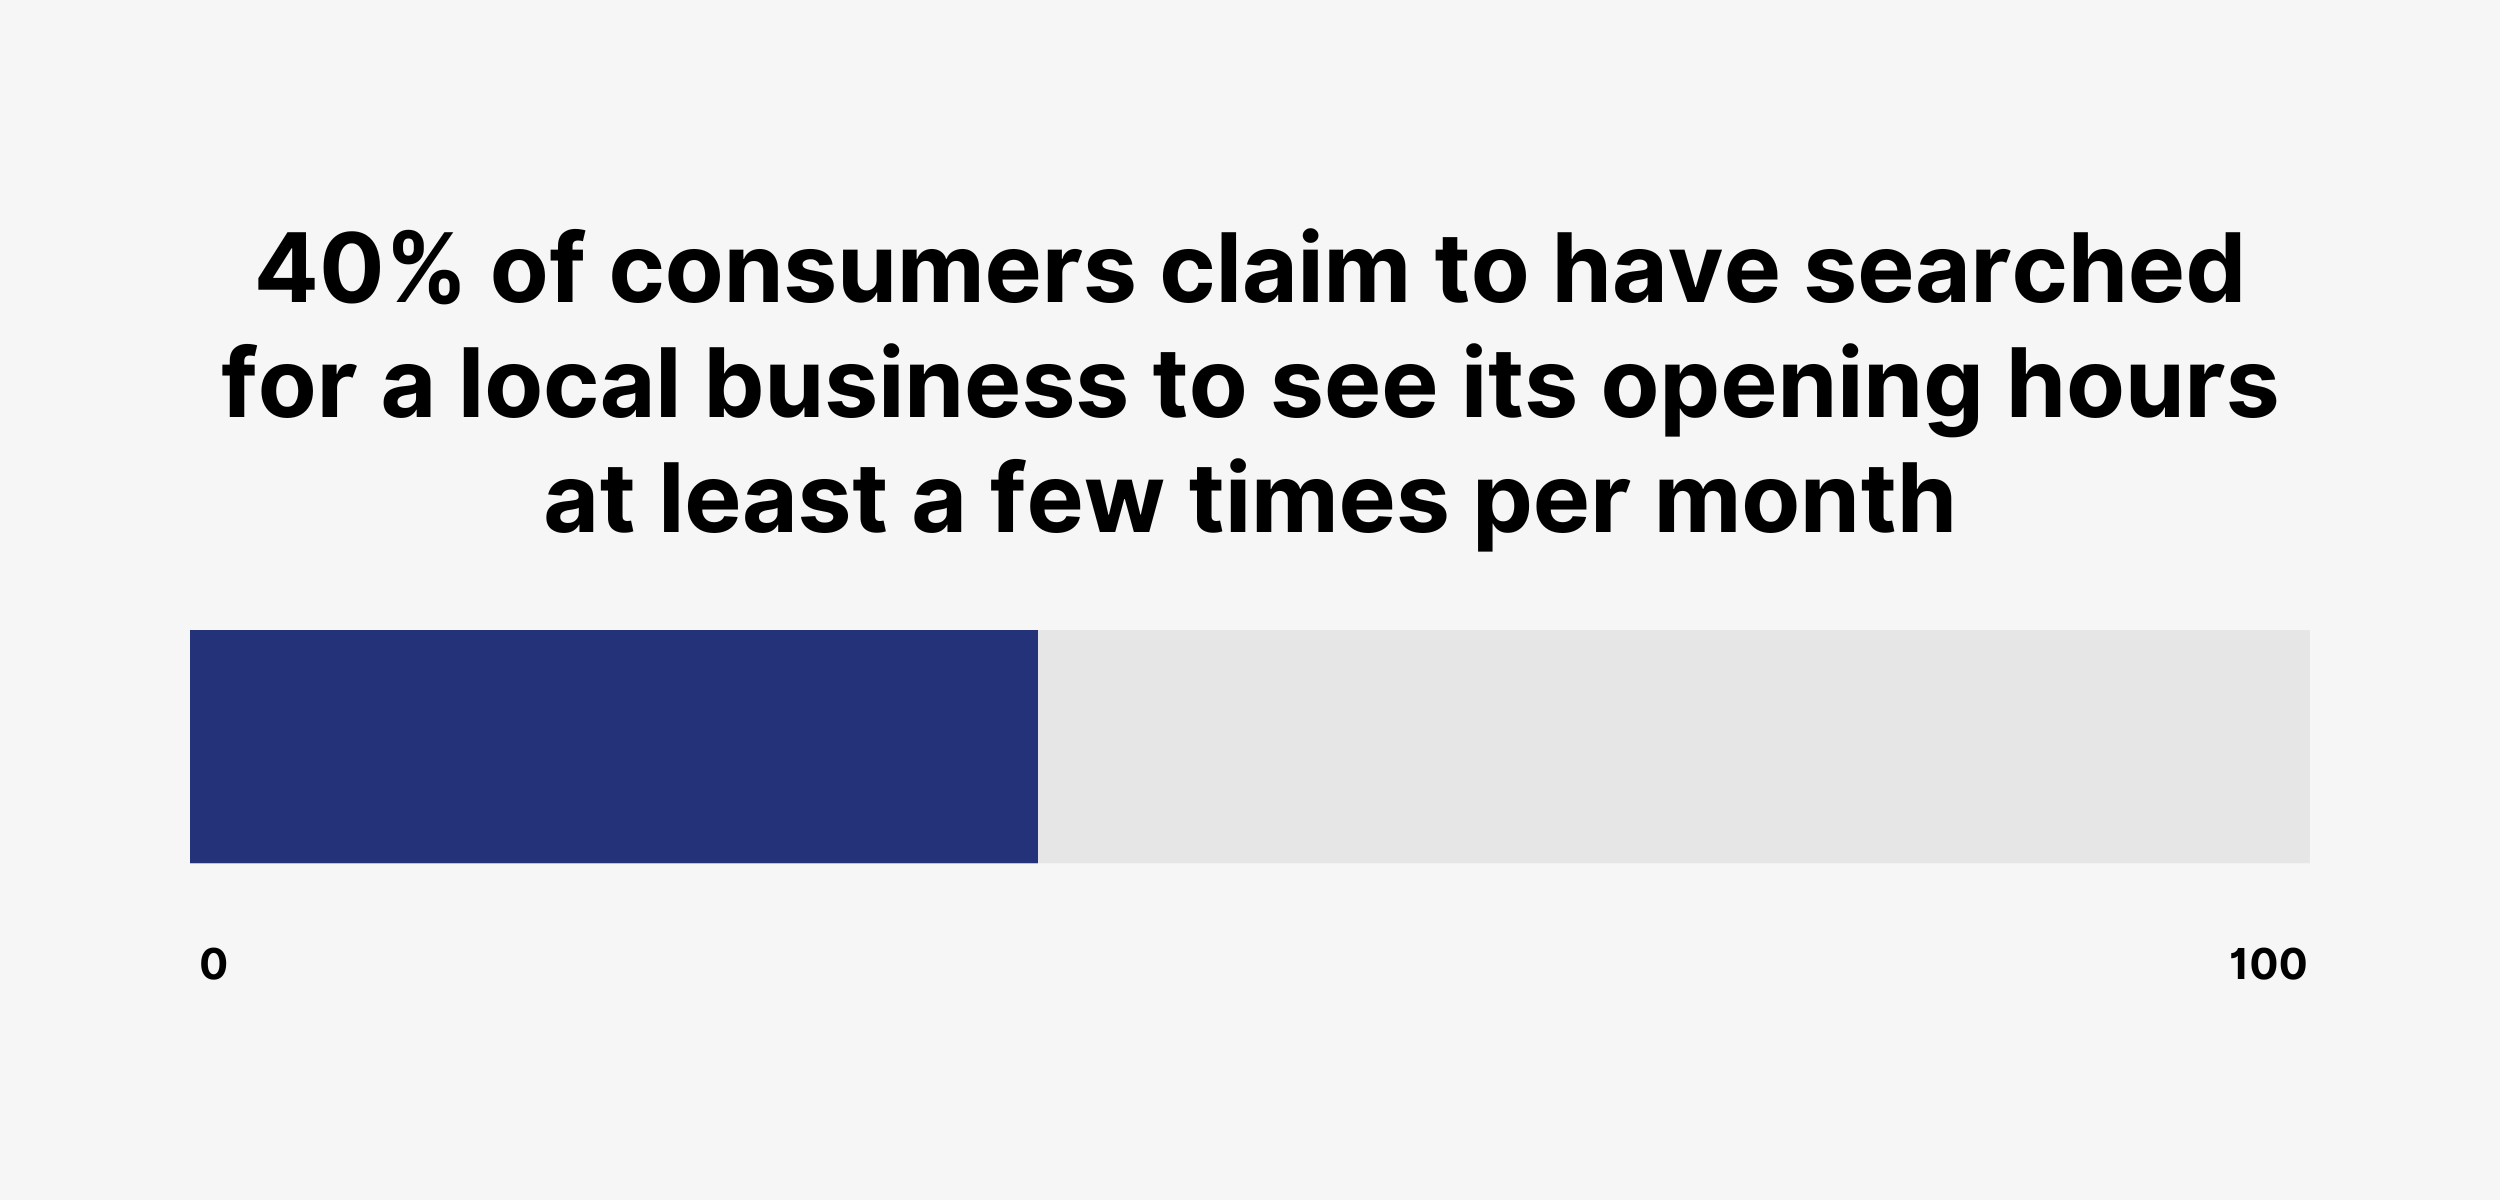 40% of consumers claim to have searched for a local business to see its opening hours at least a few times per month